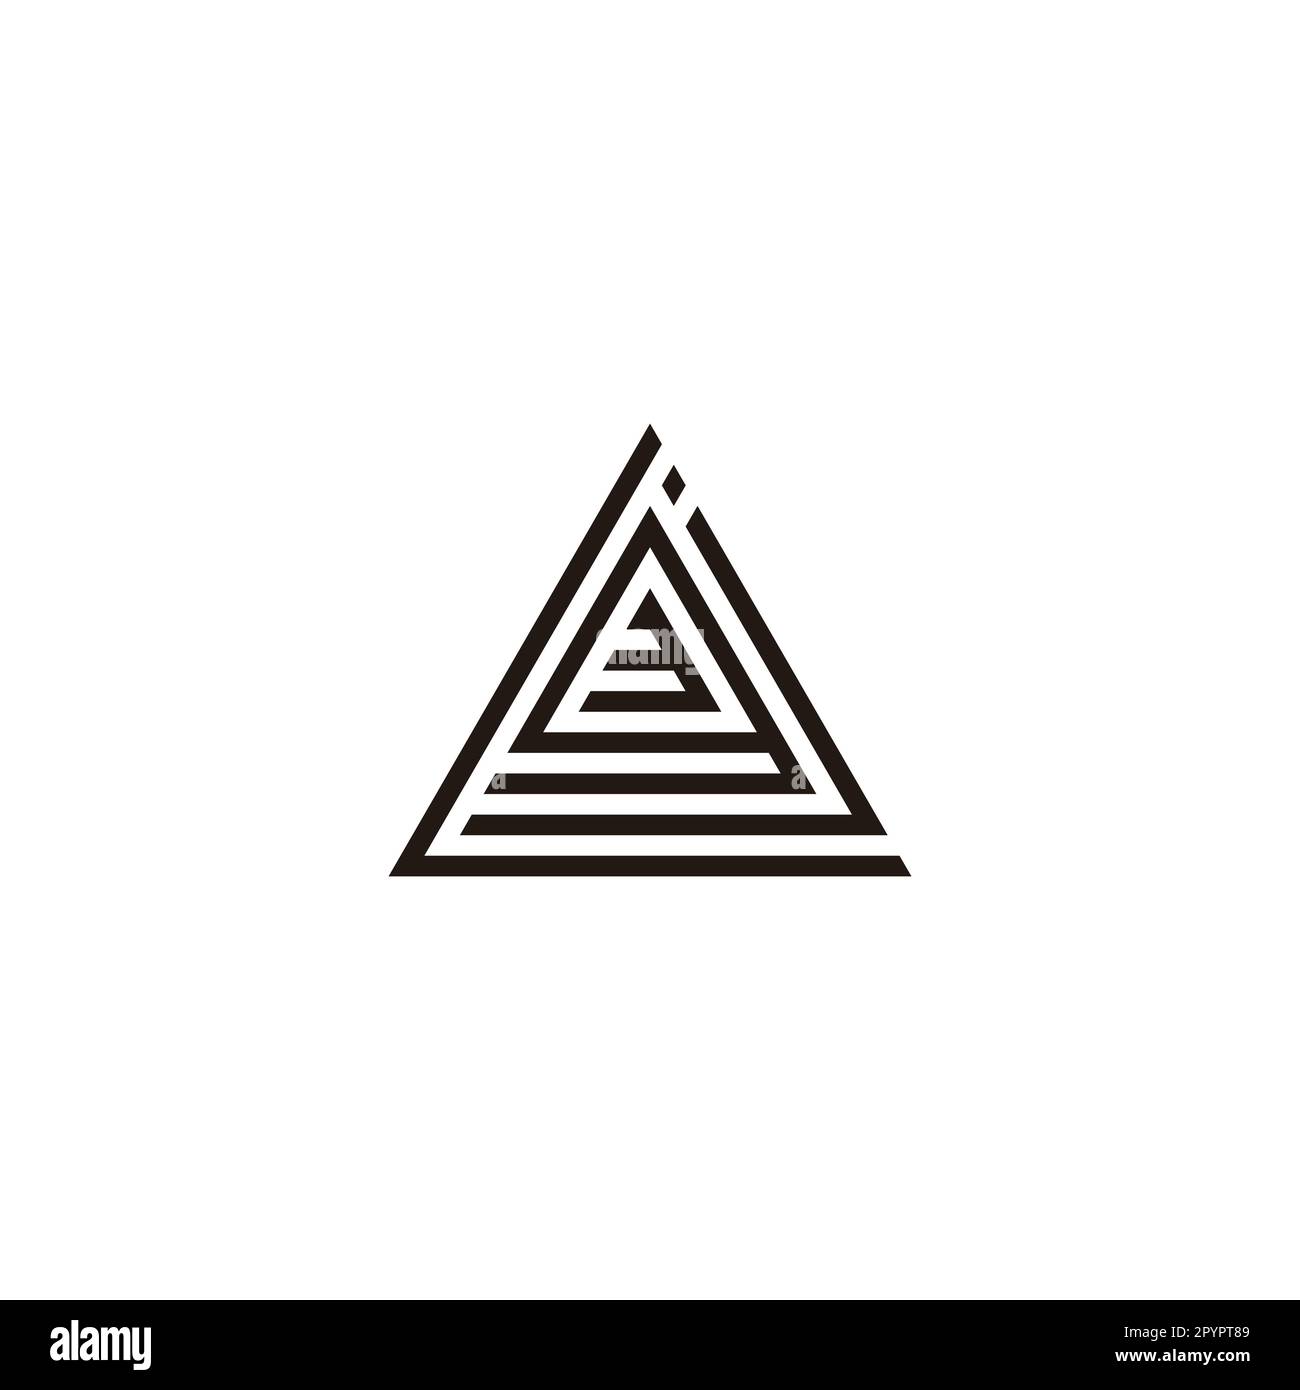 Letter L, j, g and number 3 triangle geometric symbol simple logo ...